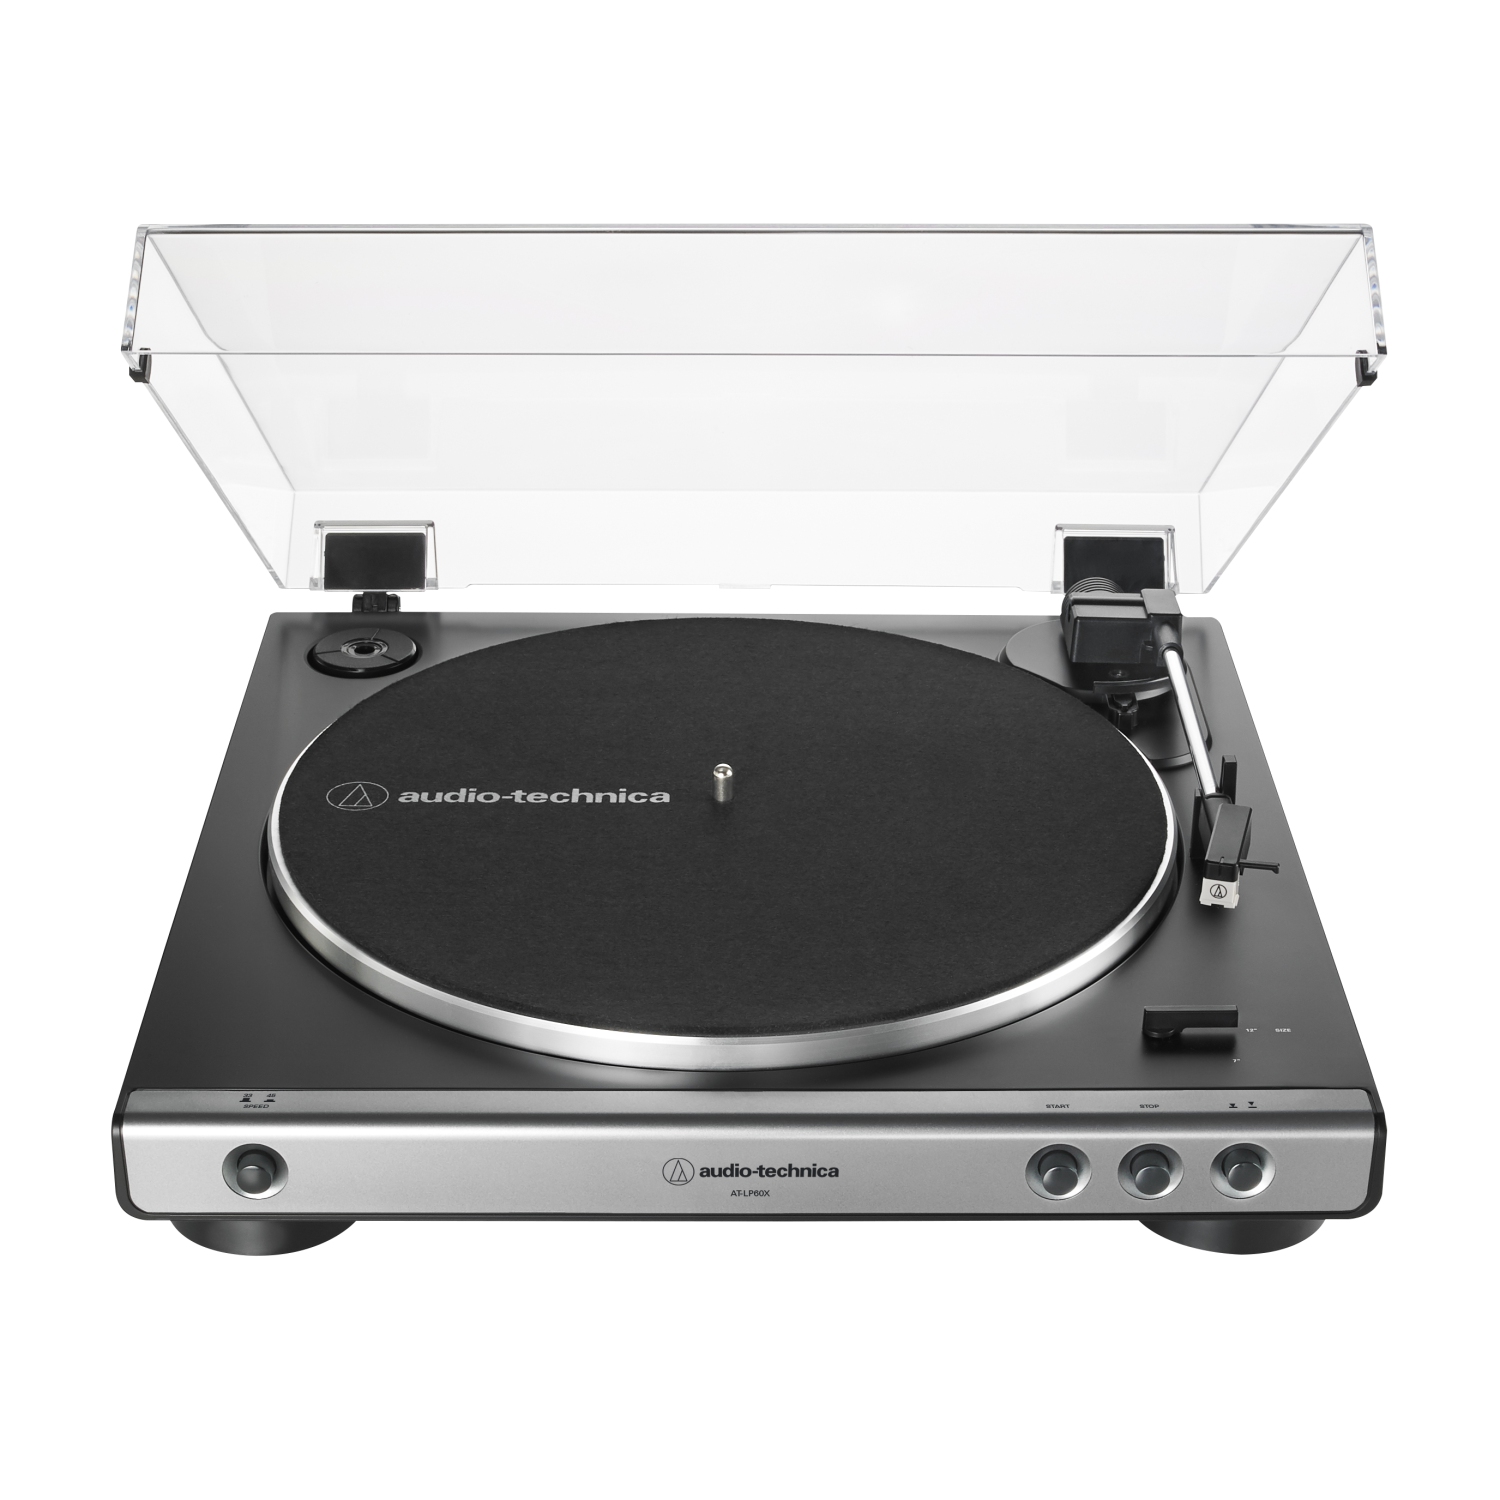 Refurbished (Excellent) - Audio-Technica AT-LP60X-GM Fully Automatic Belt-Drive Stereo Turntable, Gunmetal/Black - Manufacturer Refurbished